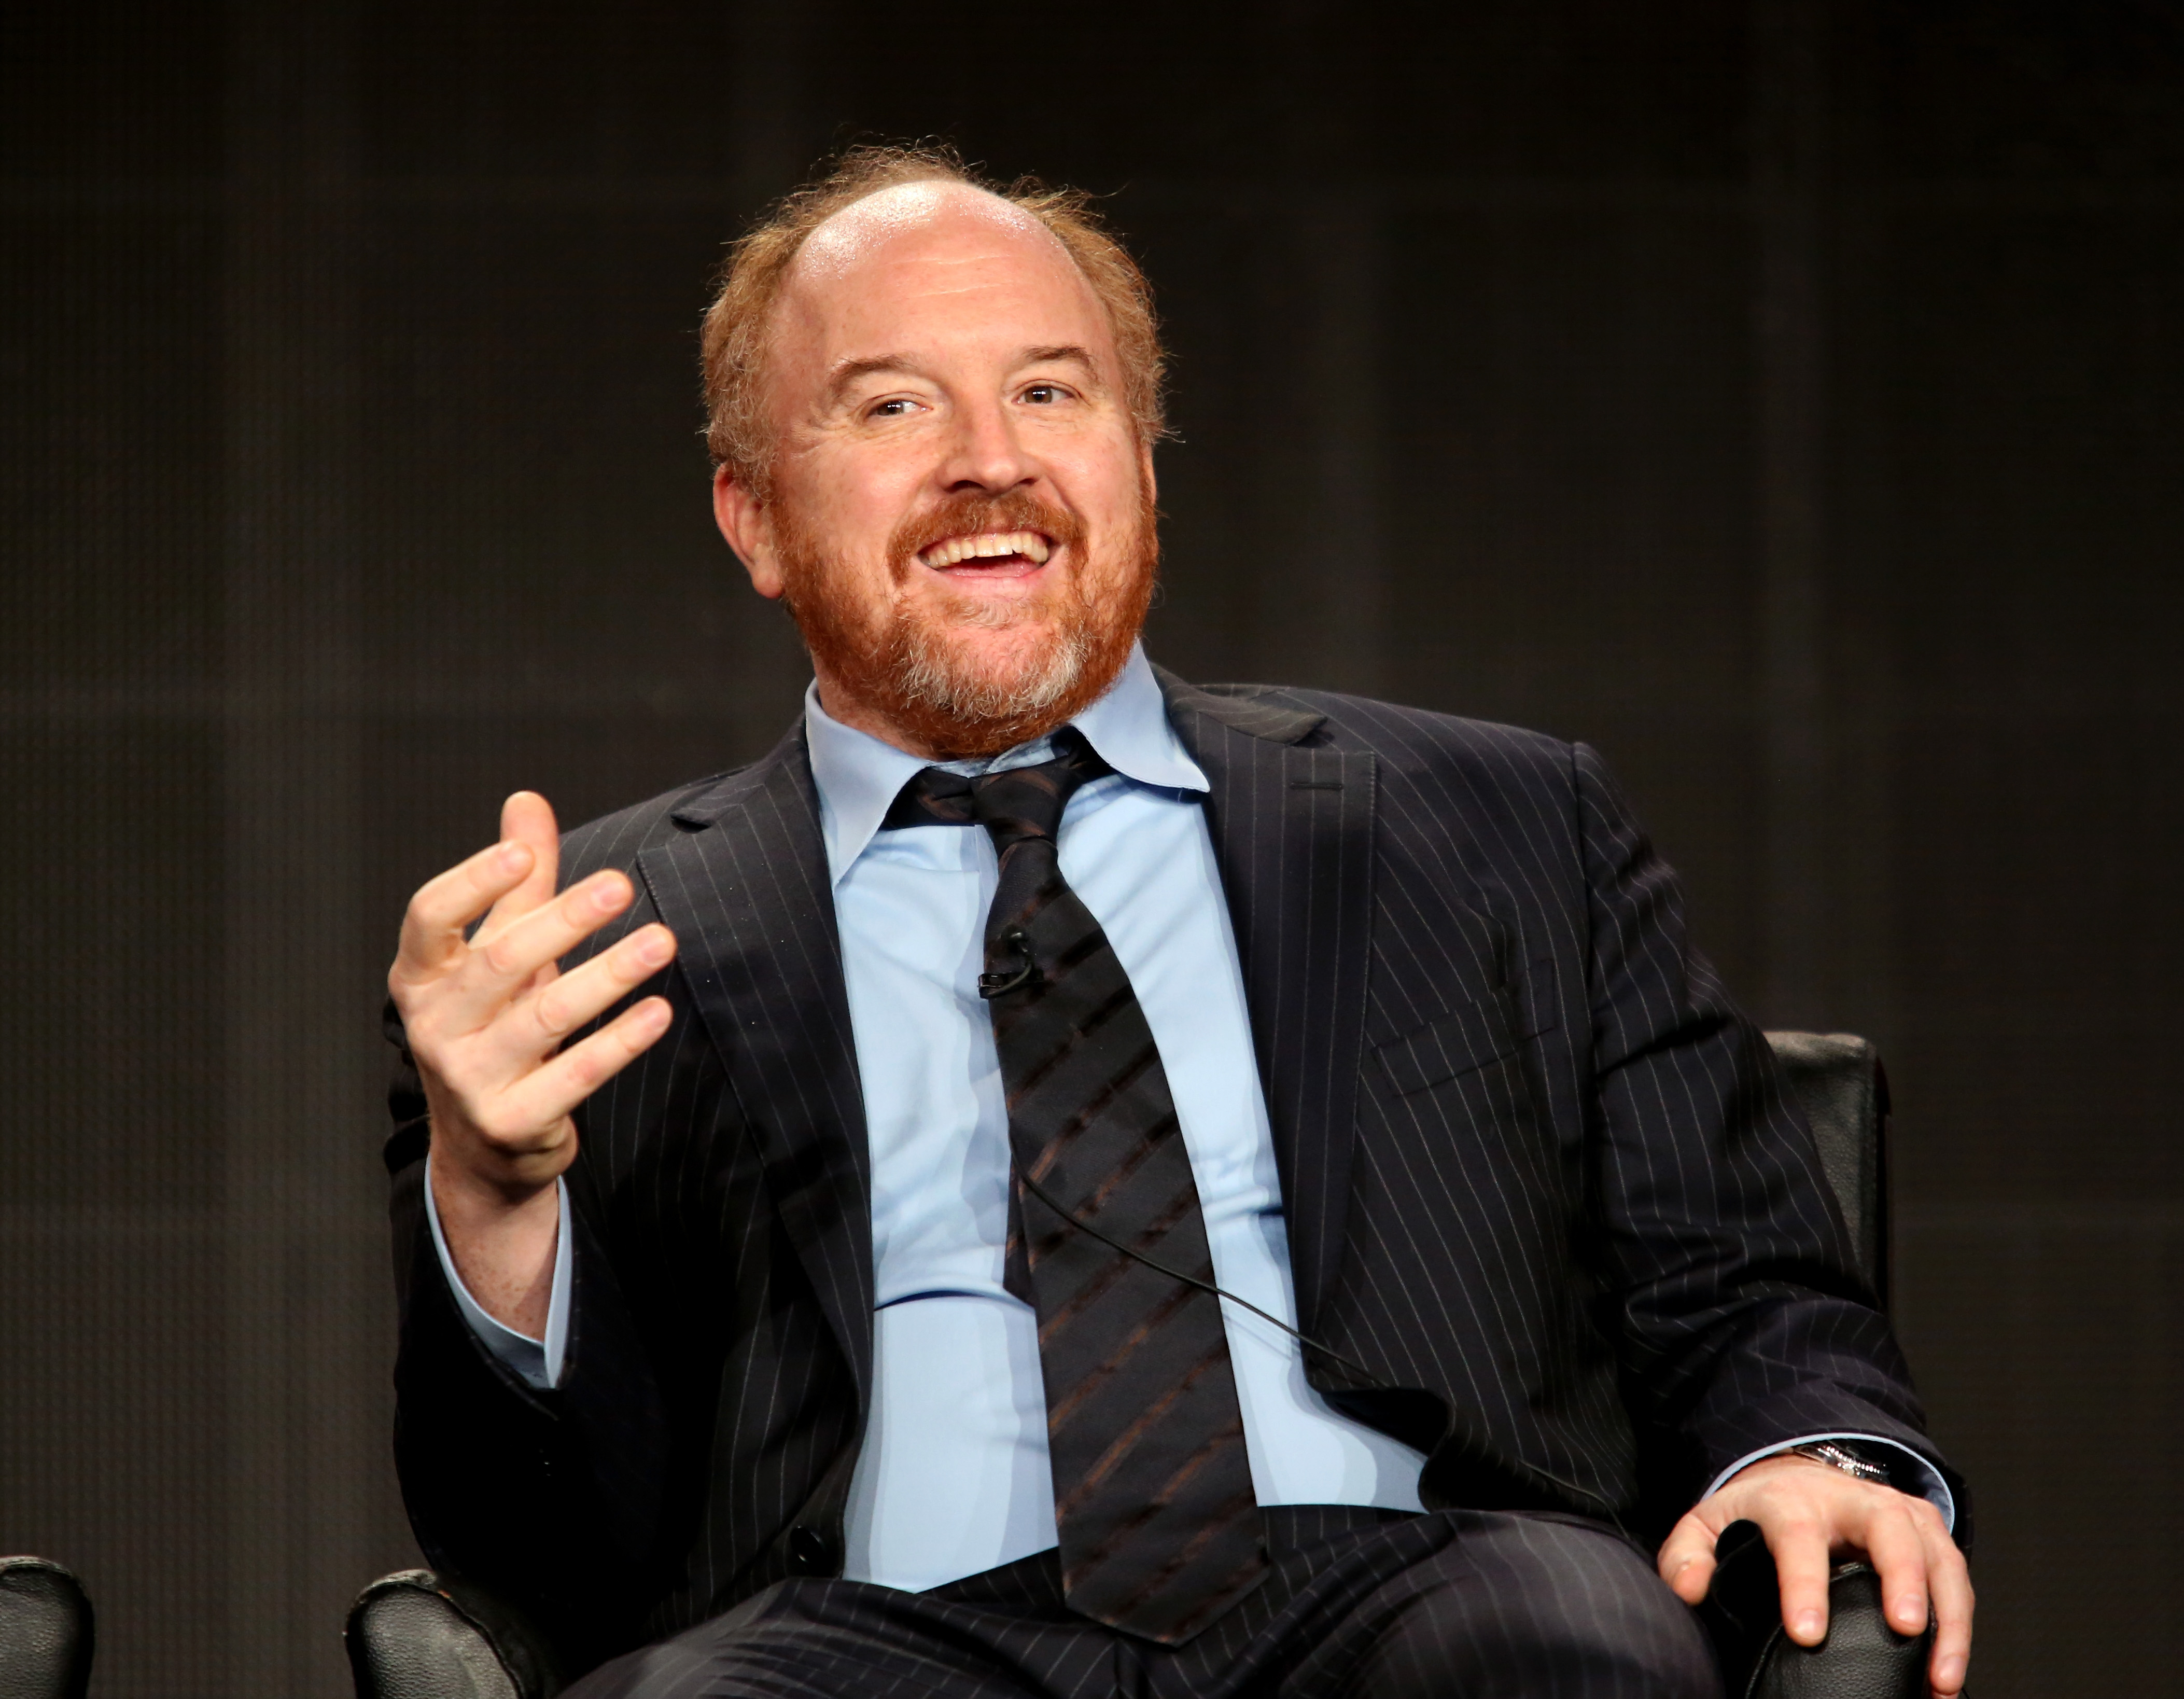 Louis C.K. at the 'Louie' panel discussion during the Television Critics Association press tour in Pasadena, Calif. on Jan. 18, 2015. (Frederick M. Brown—Getty Images)